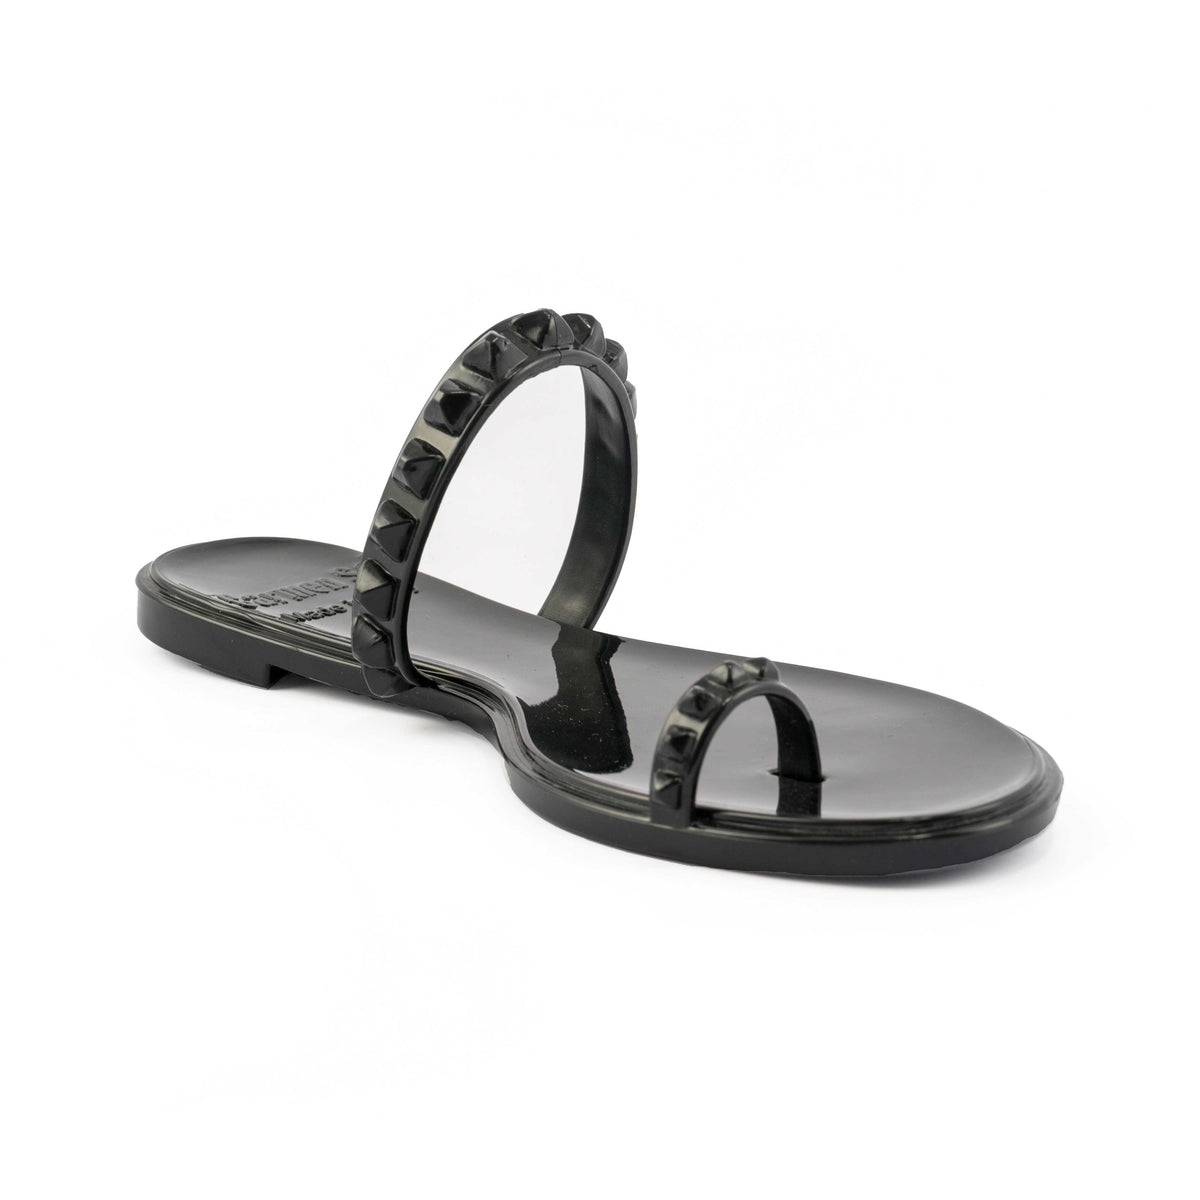 Black Carmen Sol jelly studded sandals for the pool party